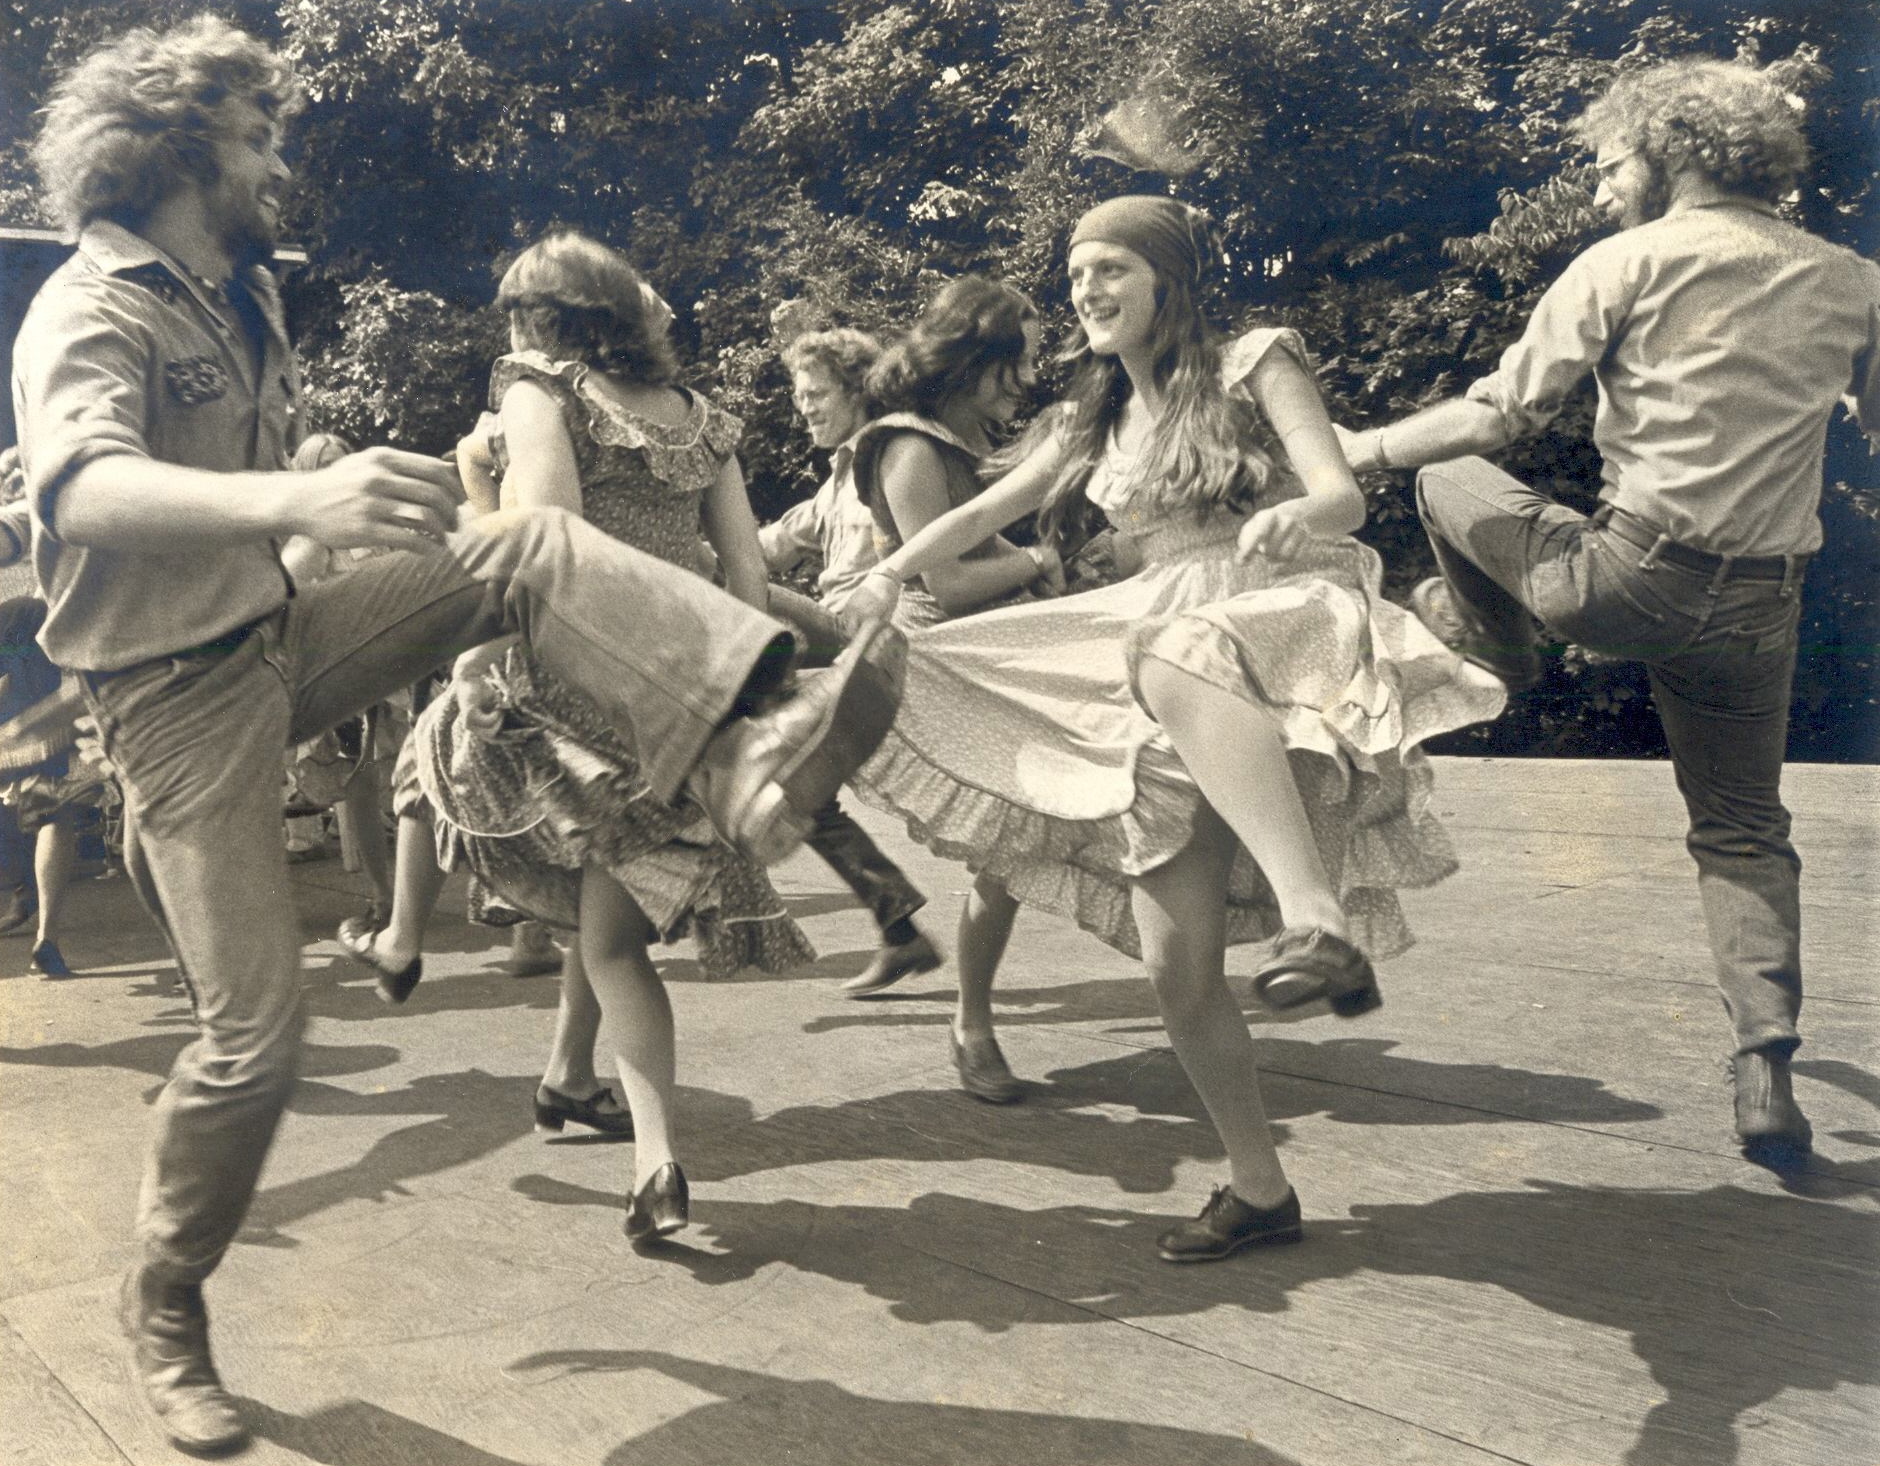  The Green Grass Cloggers Greenville, North Carolina (early 1970s) (left to right: Rodney Sutton, Toni Jordan, Dudley Culp)  Dance Musicians 